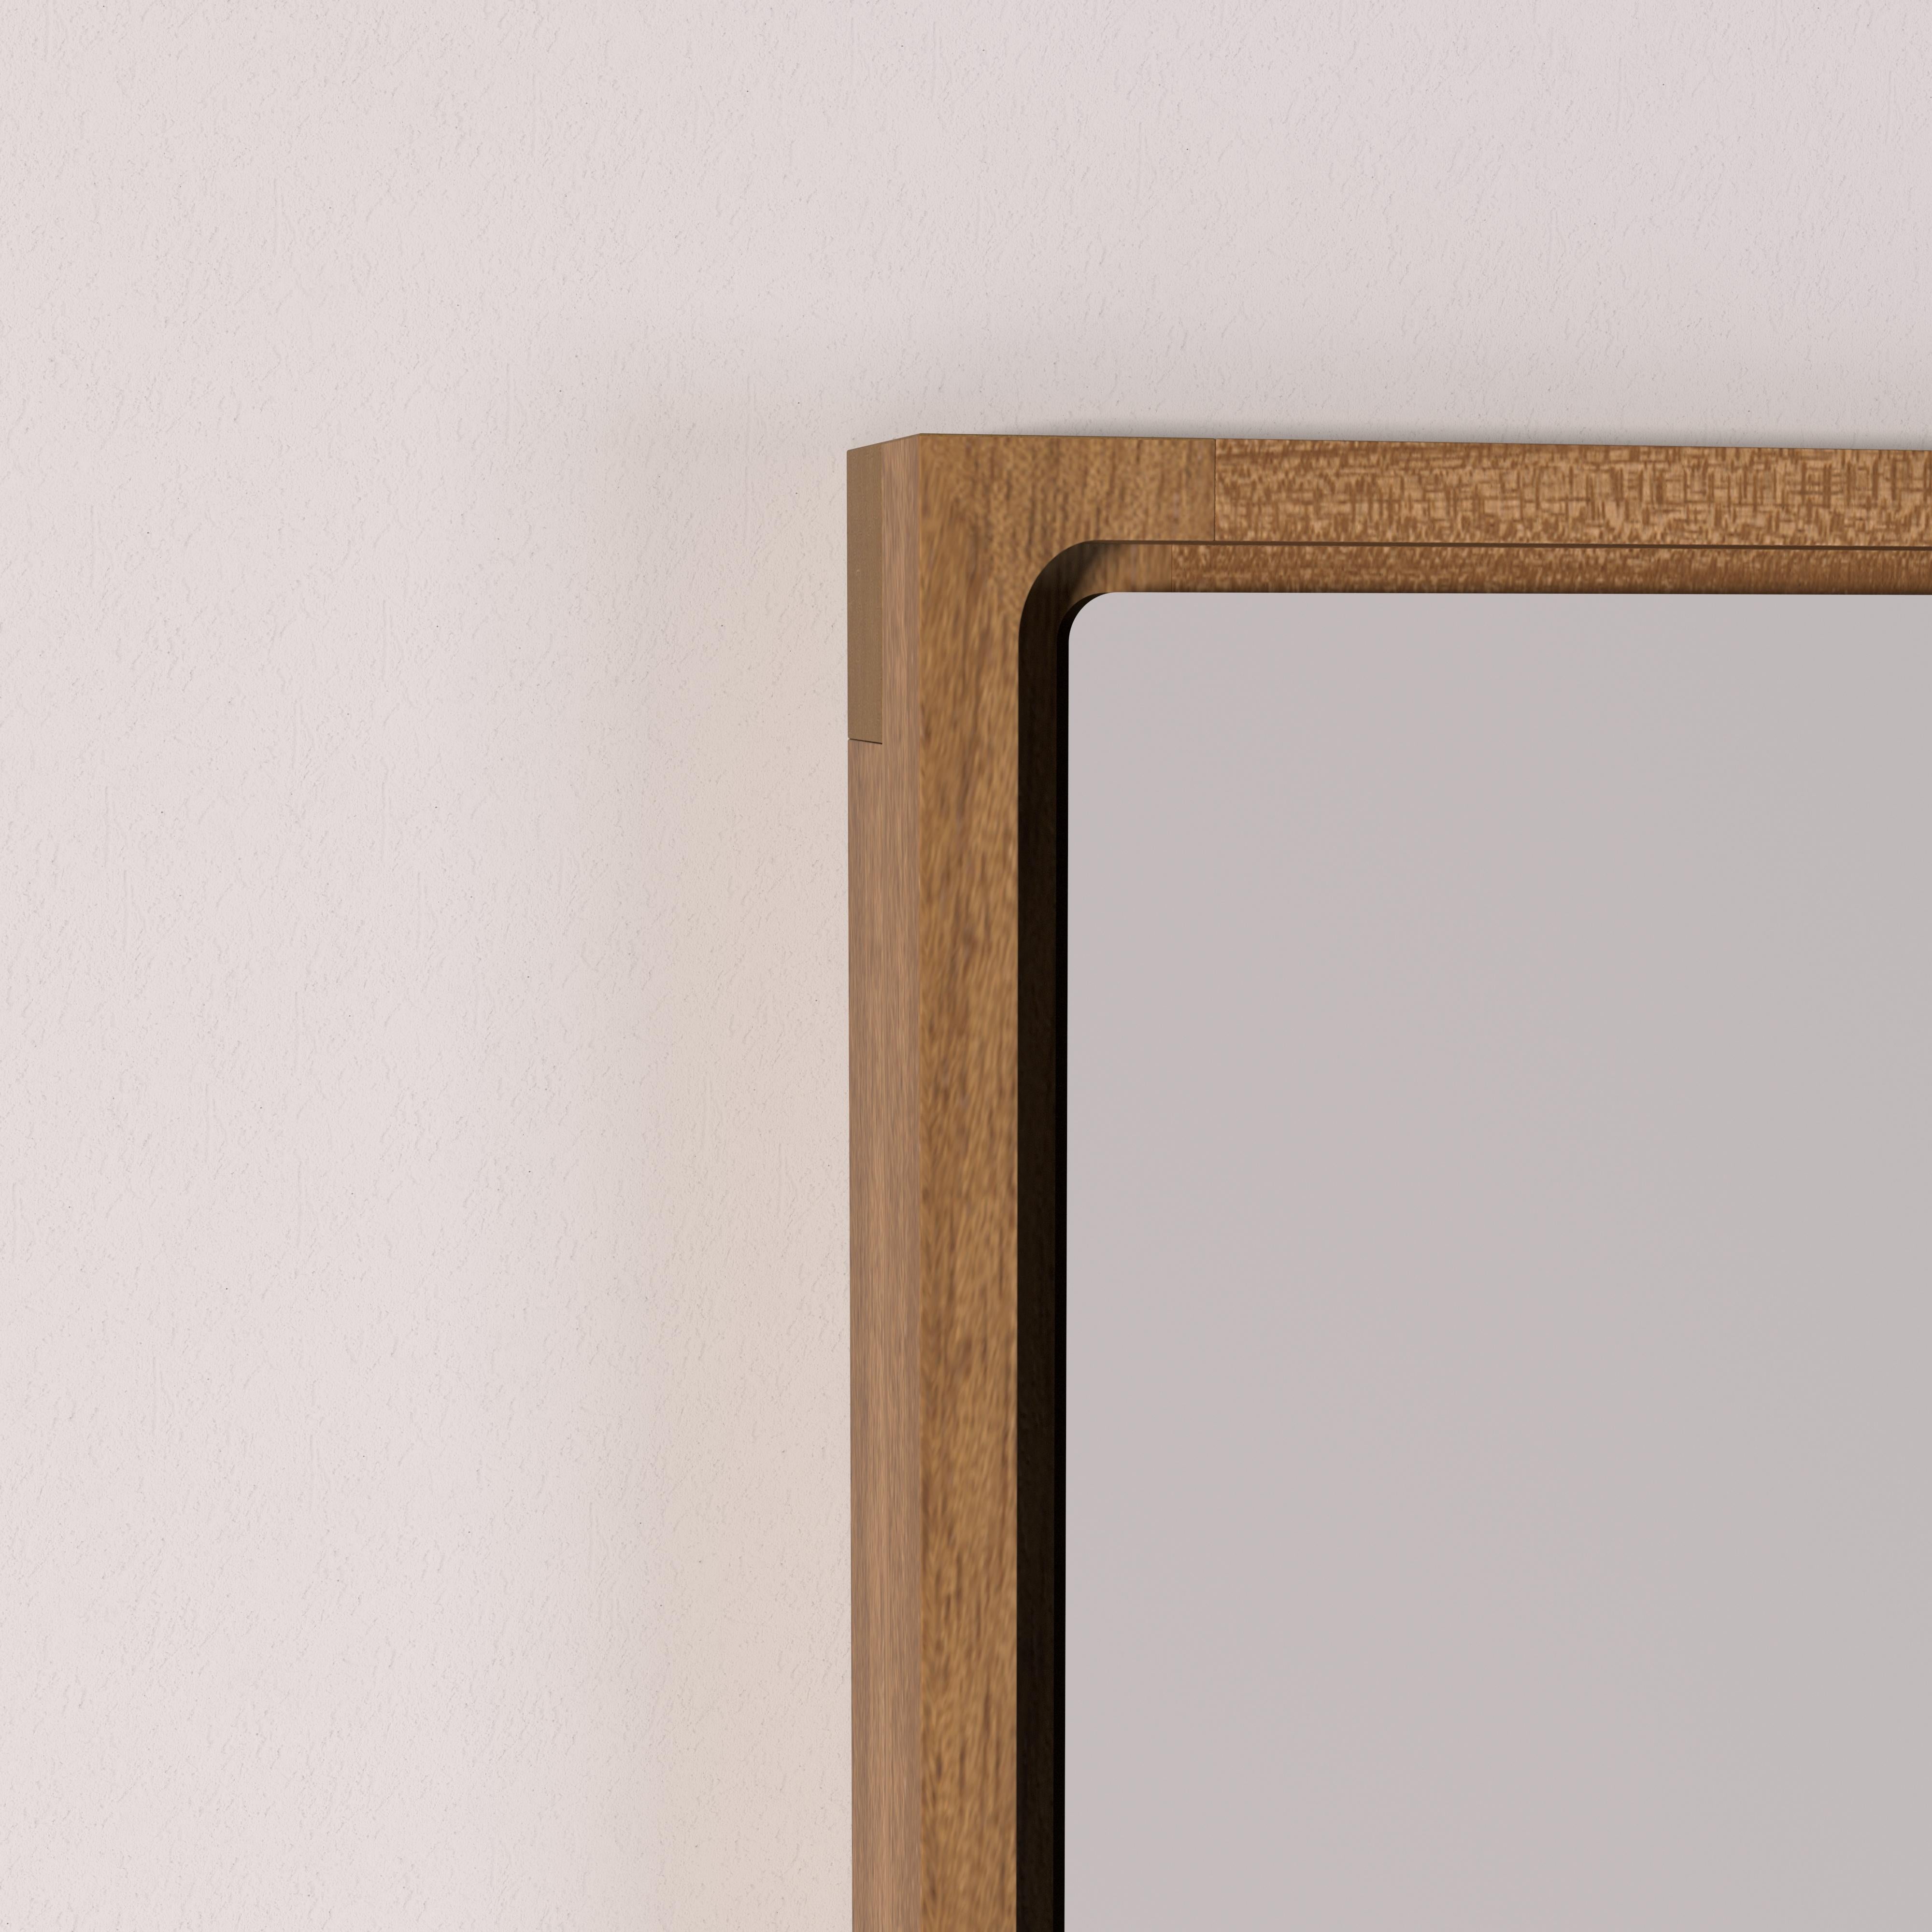 Elegant and simple, it brings the carpenter's meticulous work to the solid wood frame held in place by the classic half-lap insert. This one with the beautiful detail made in the router for the placement of the centralized mirror, giving a feeling